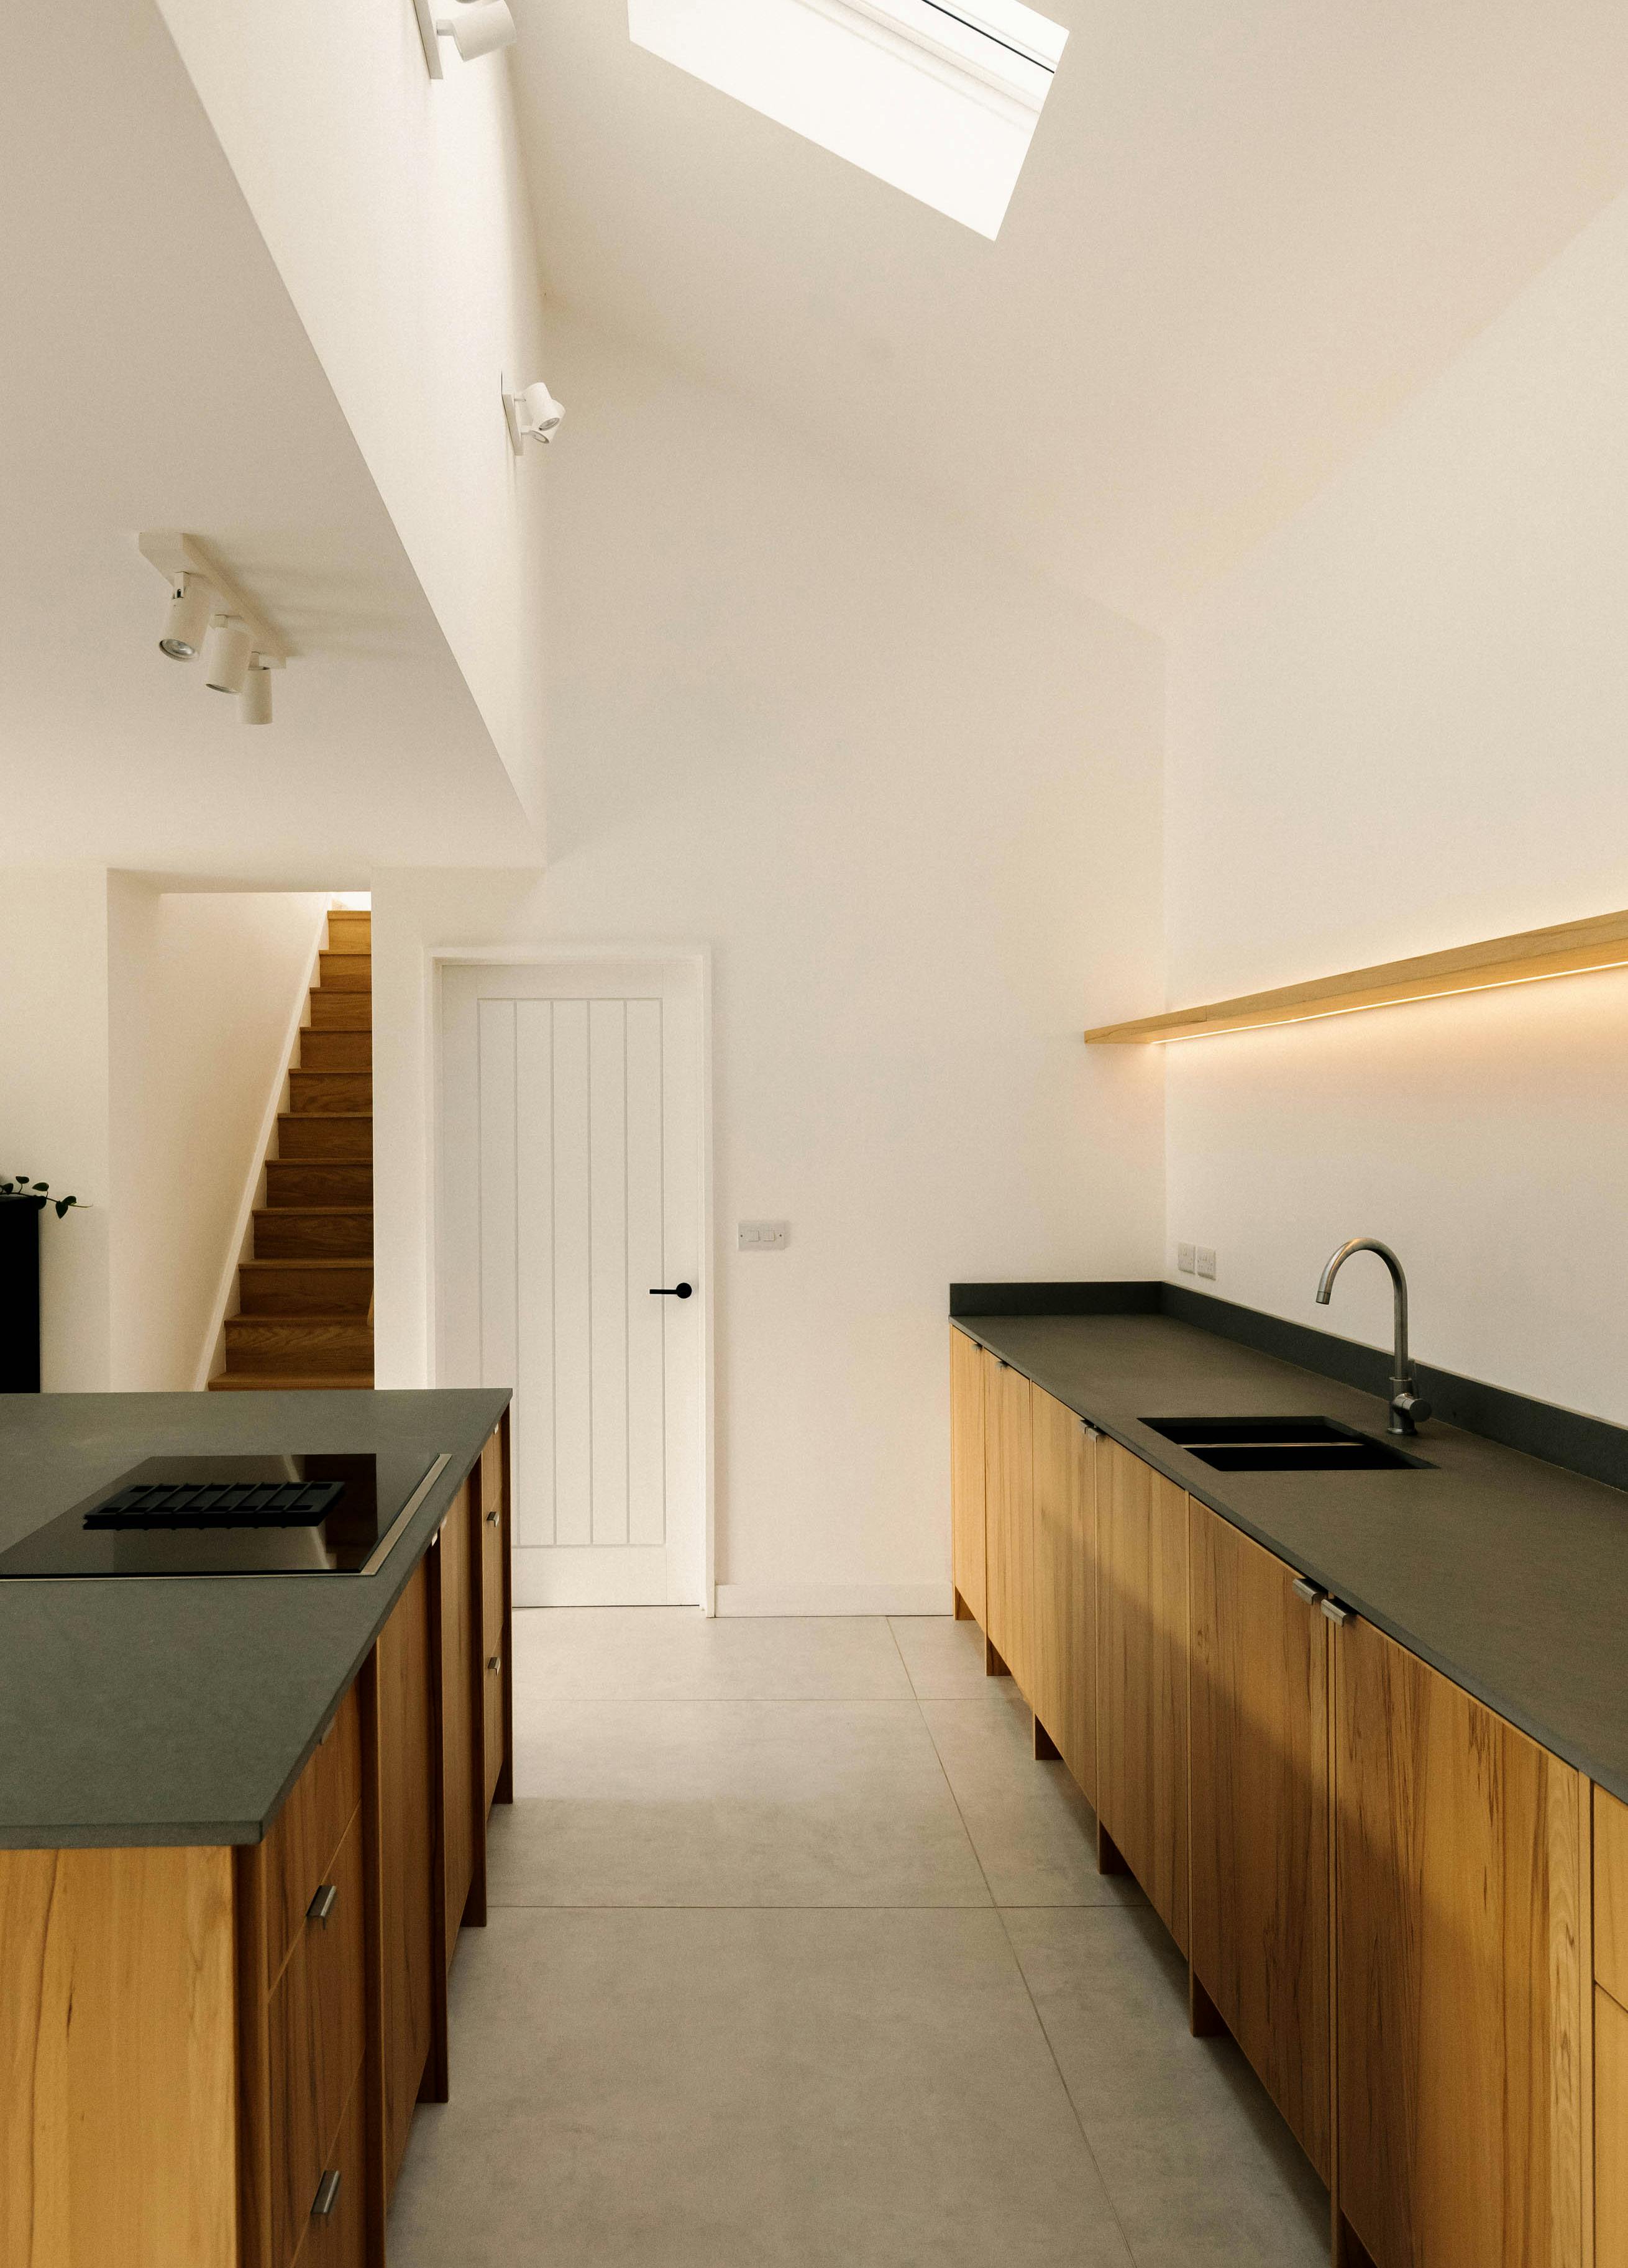 Contemporary wooden Ma-kon kitchen with limestone worktop in Northumberland.